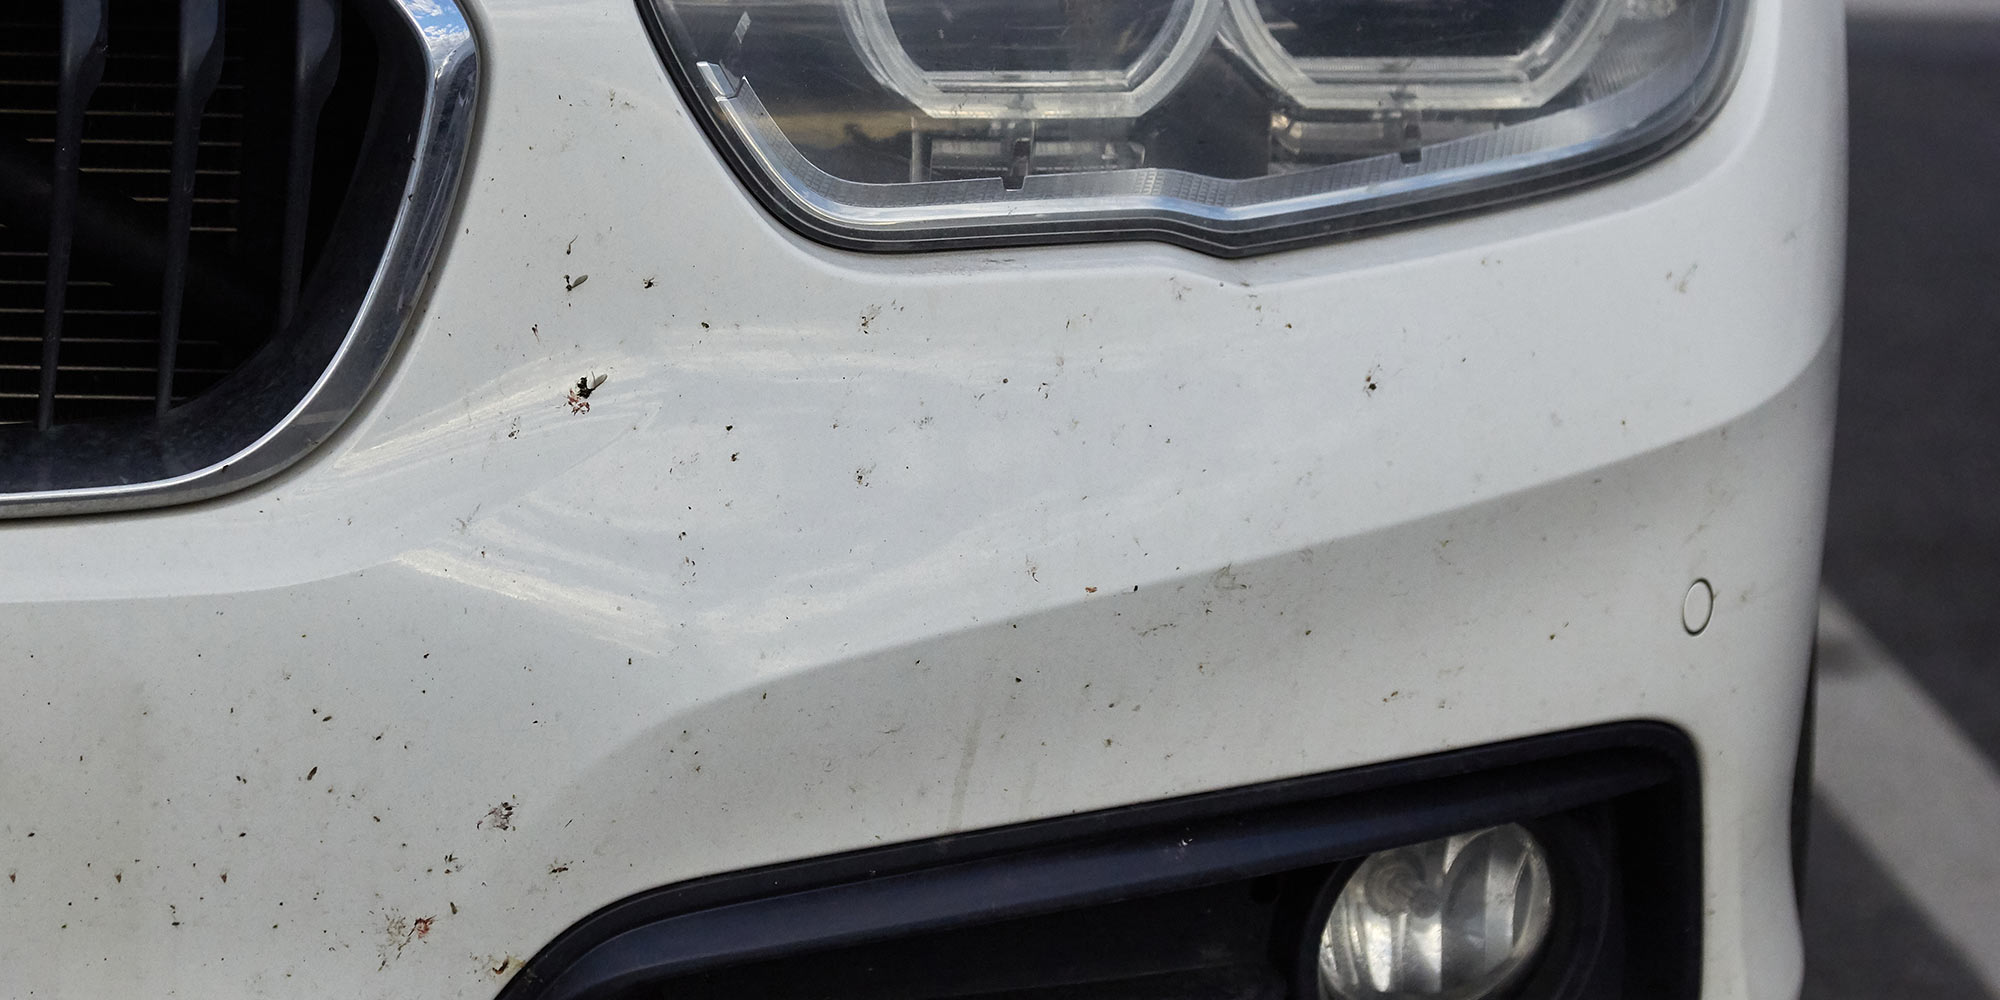 How To Remove Bugs From a Car